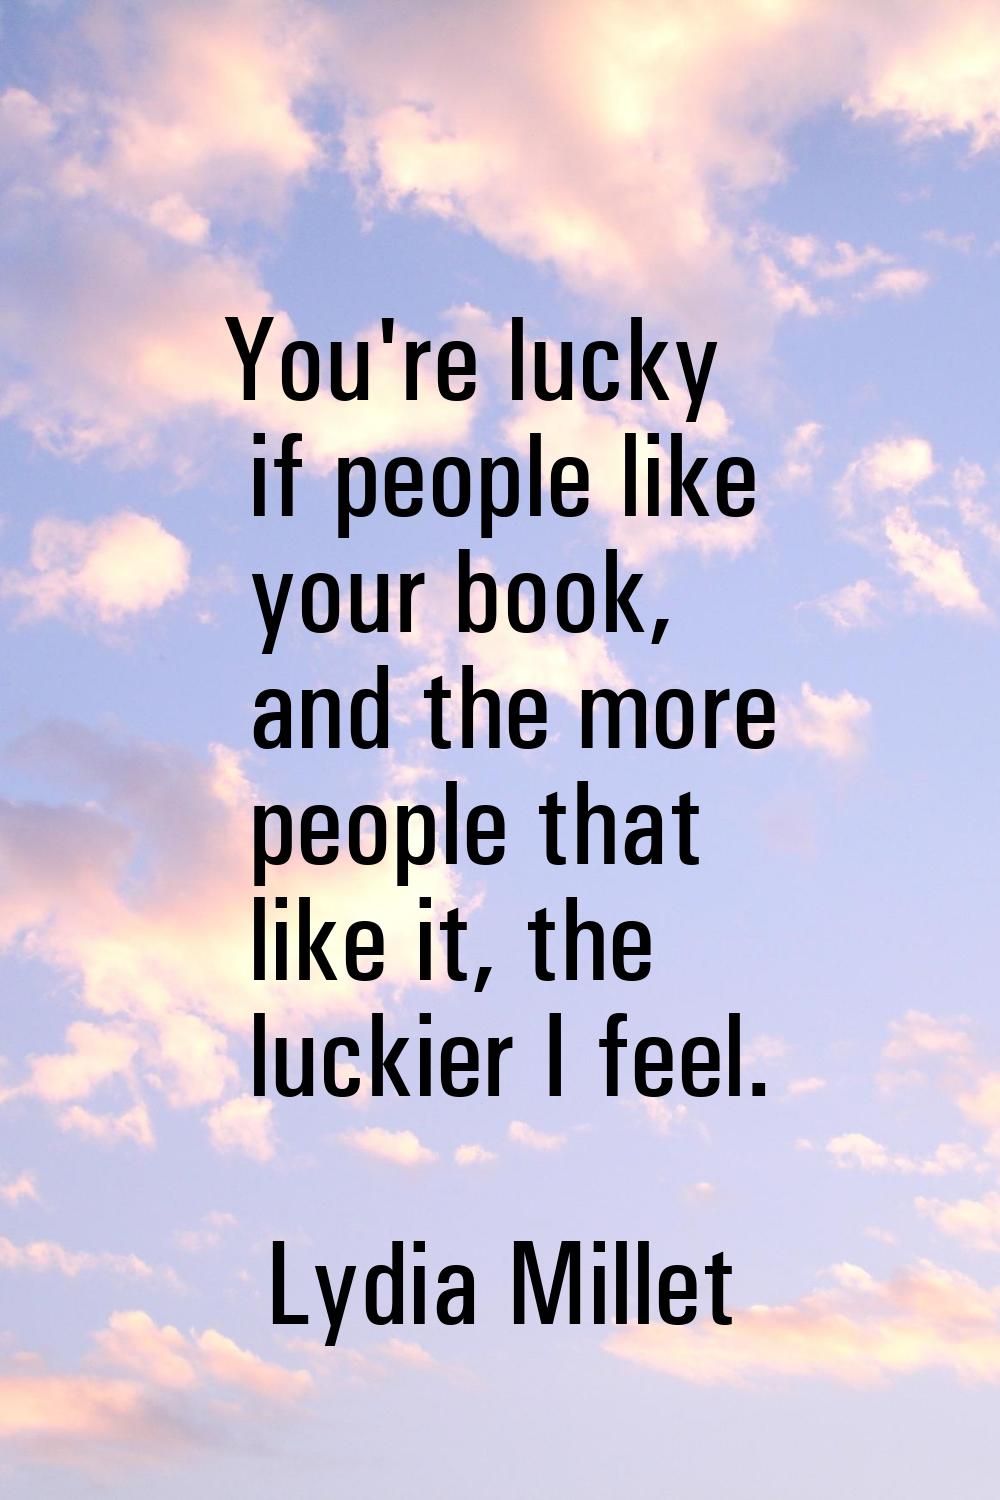 You're lucky if people like your book, and the more people that like it, the luckier I feel.